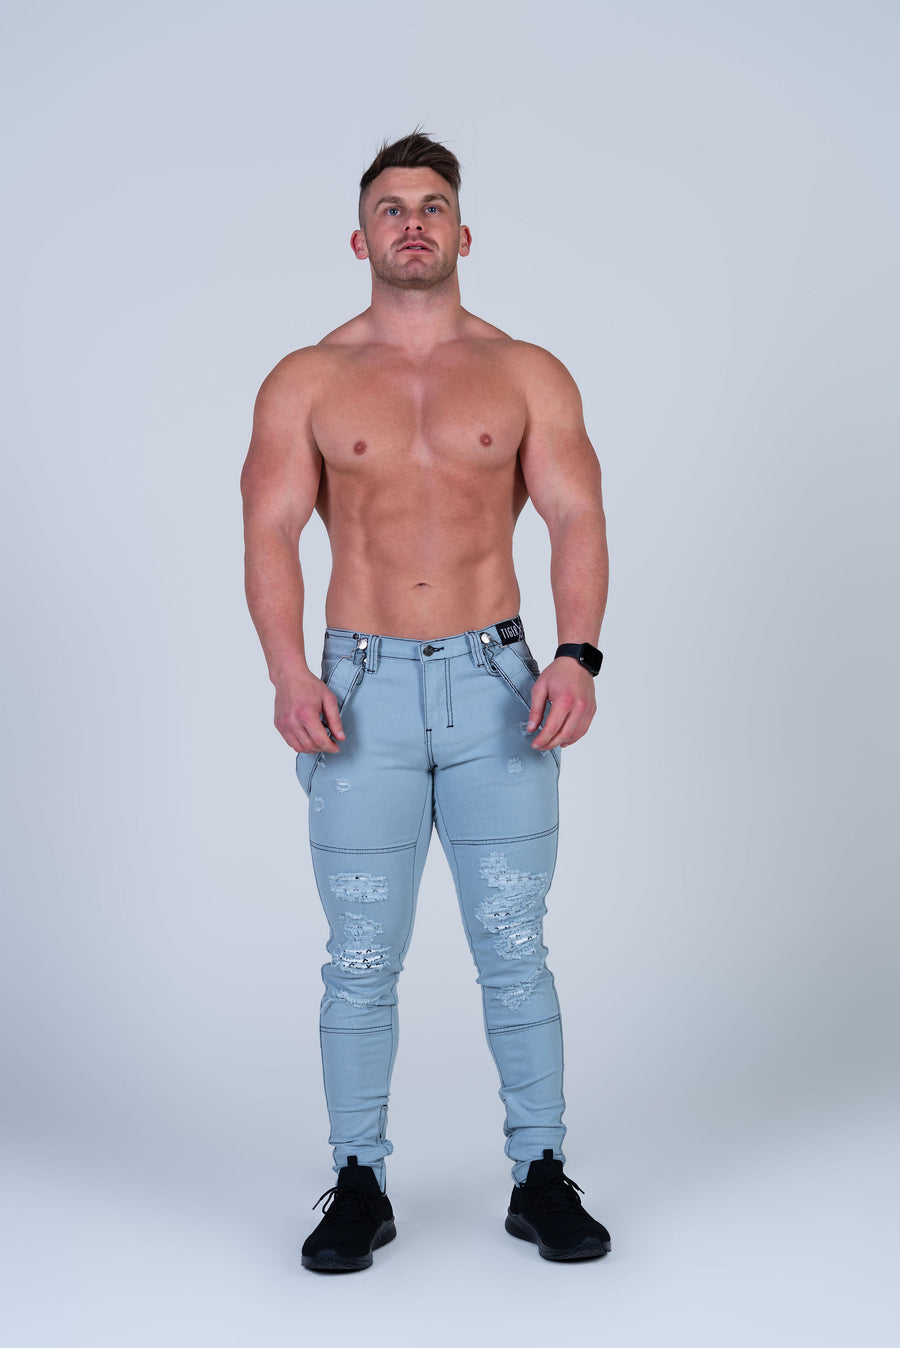 HOWIE GREY JEAN with Holes & Backing